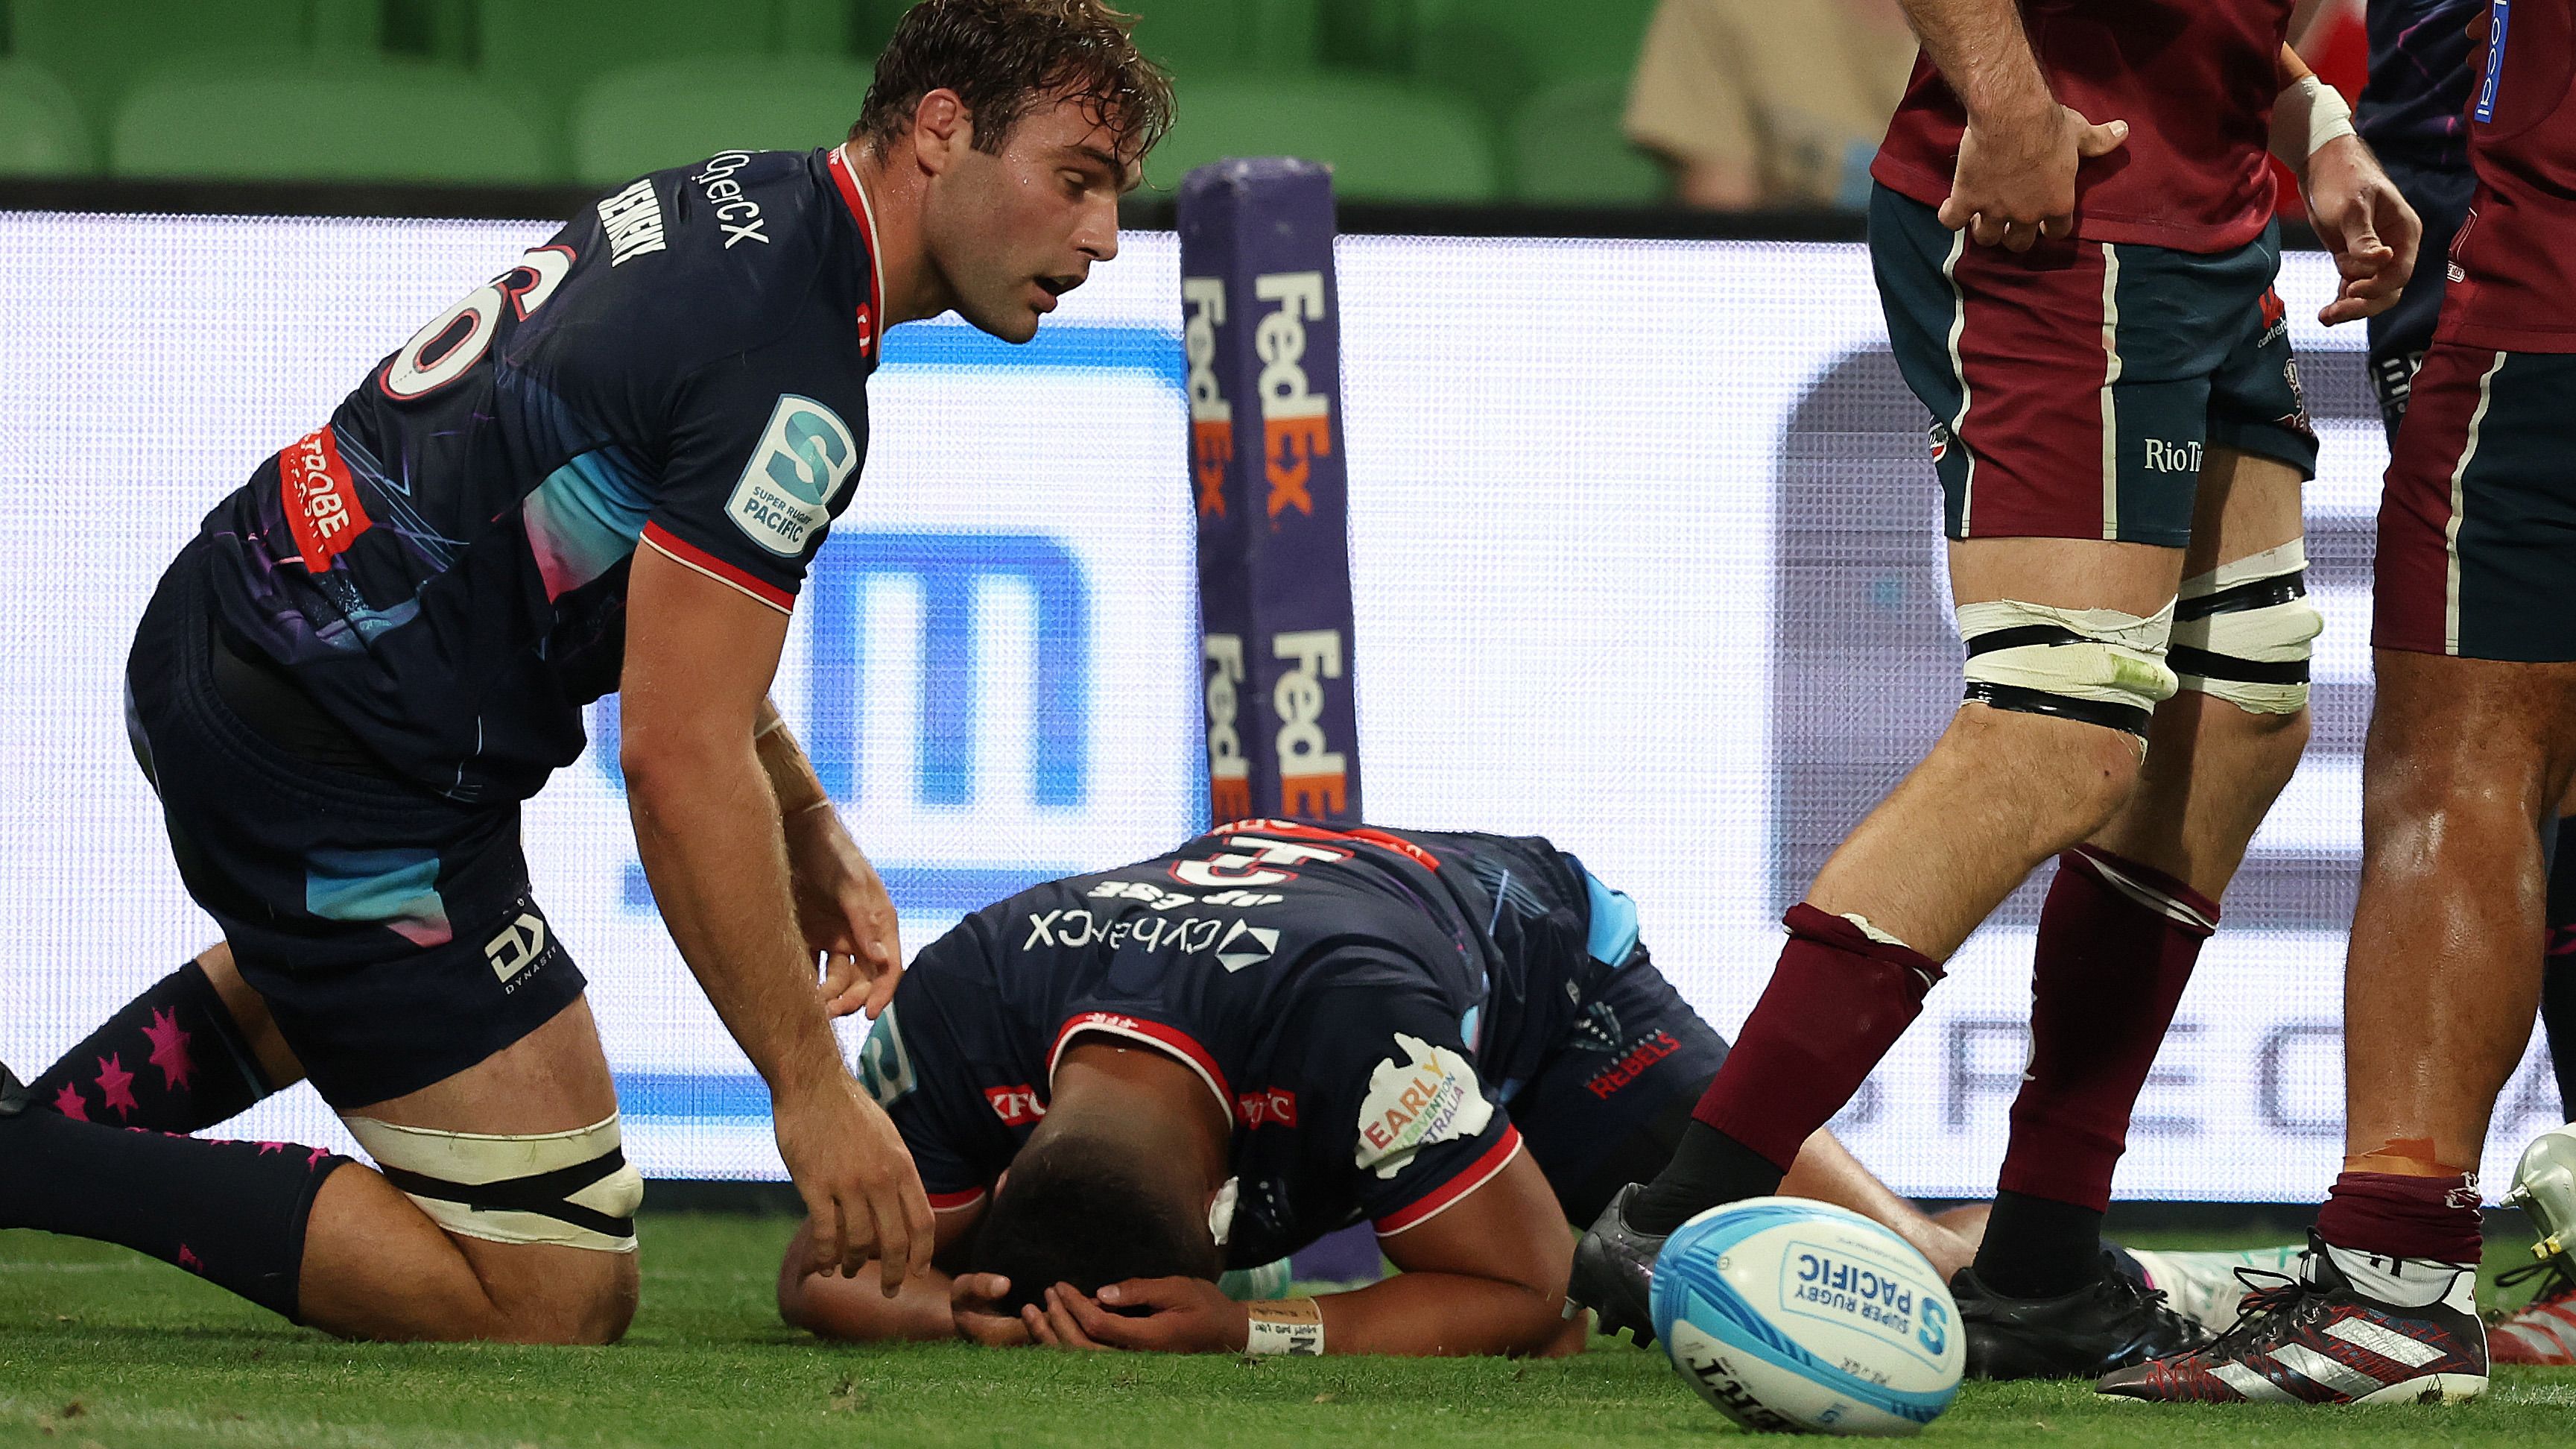 Melbourne Rebels players react to another Queensland Reds try.